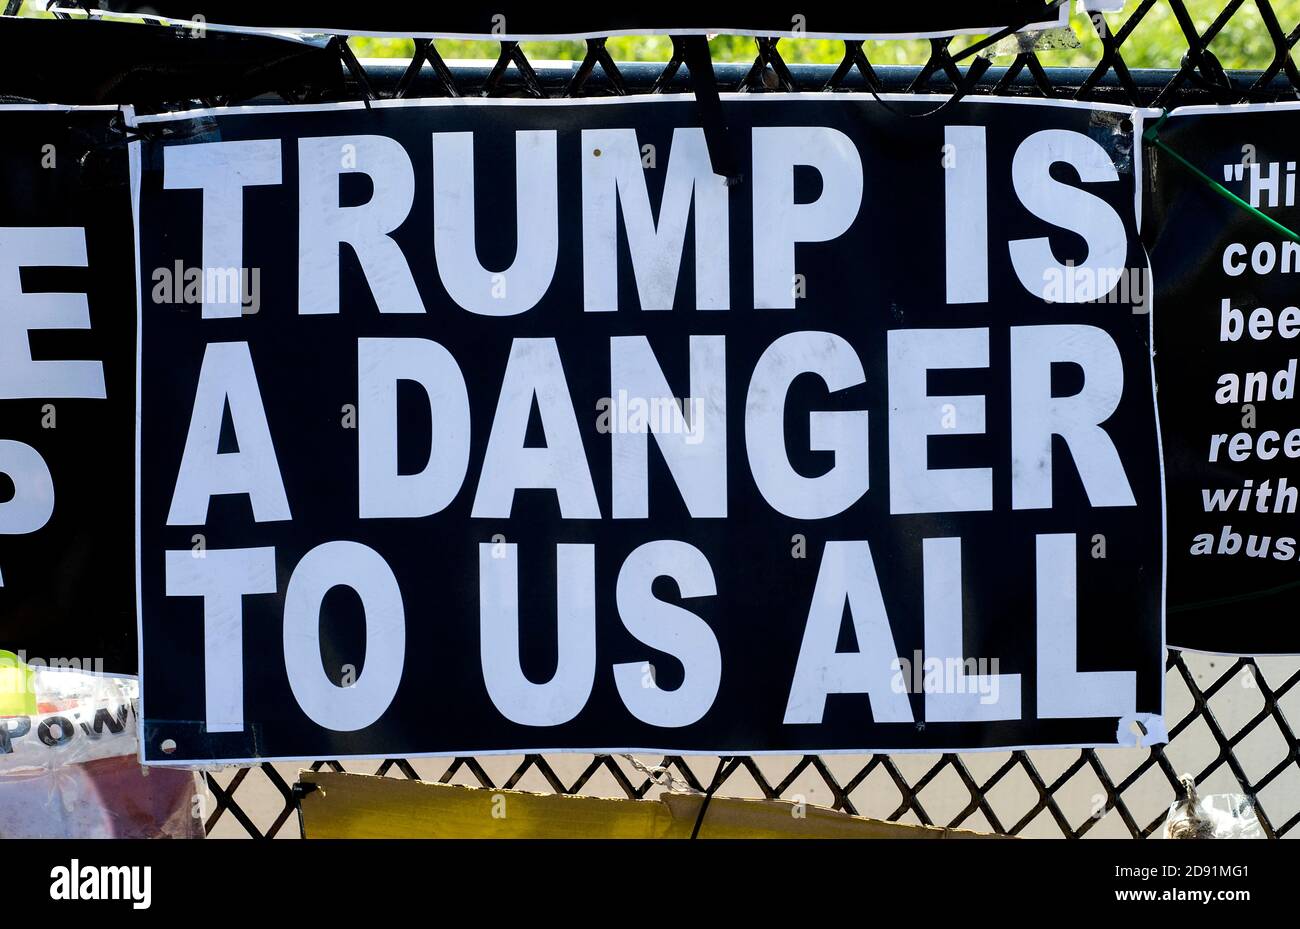 November 02, 2020, Washington, District of Columbia, USA - With one day to go until the 2020 general election, signs in and around Black Lives Matter Plaza speak to the resistance to Trumpism and what is at stake in the election.(Credit Image: © Brian Cahn/ZUMA Wire) Stock Photo